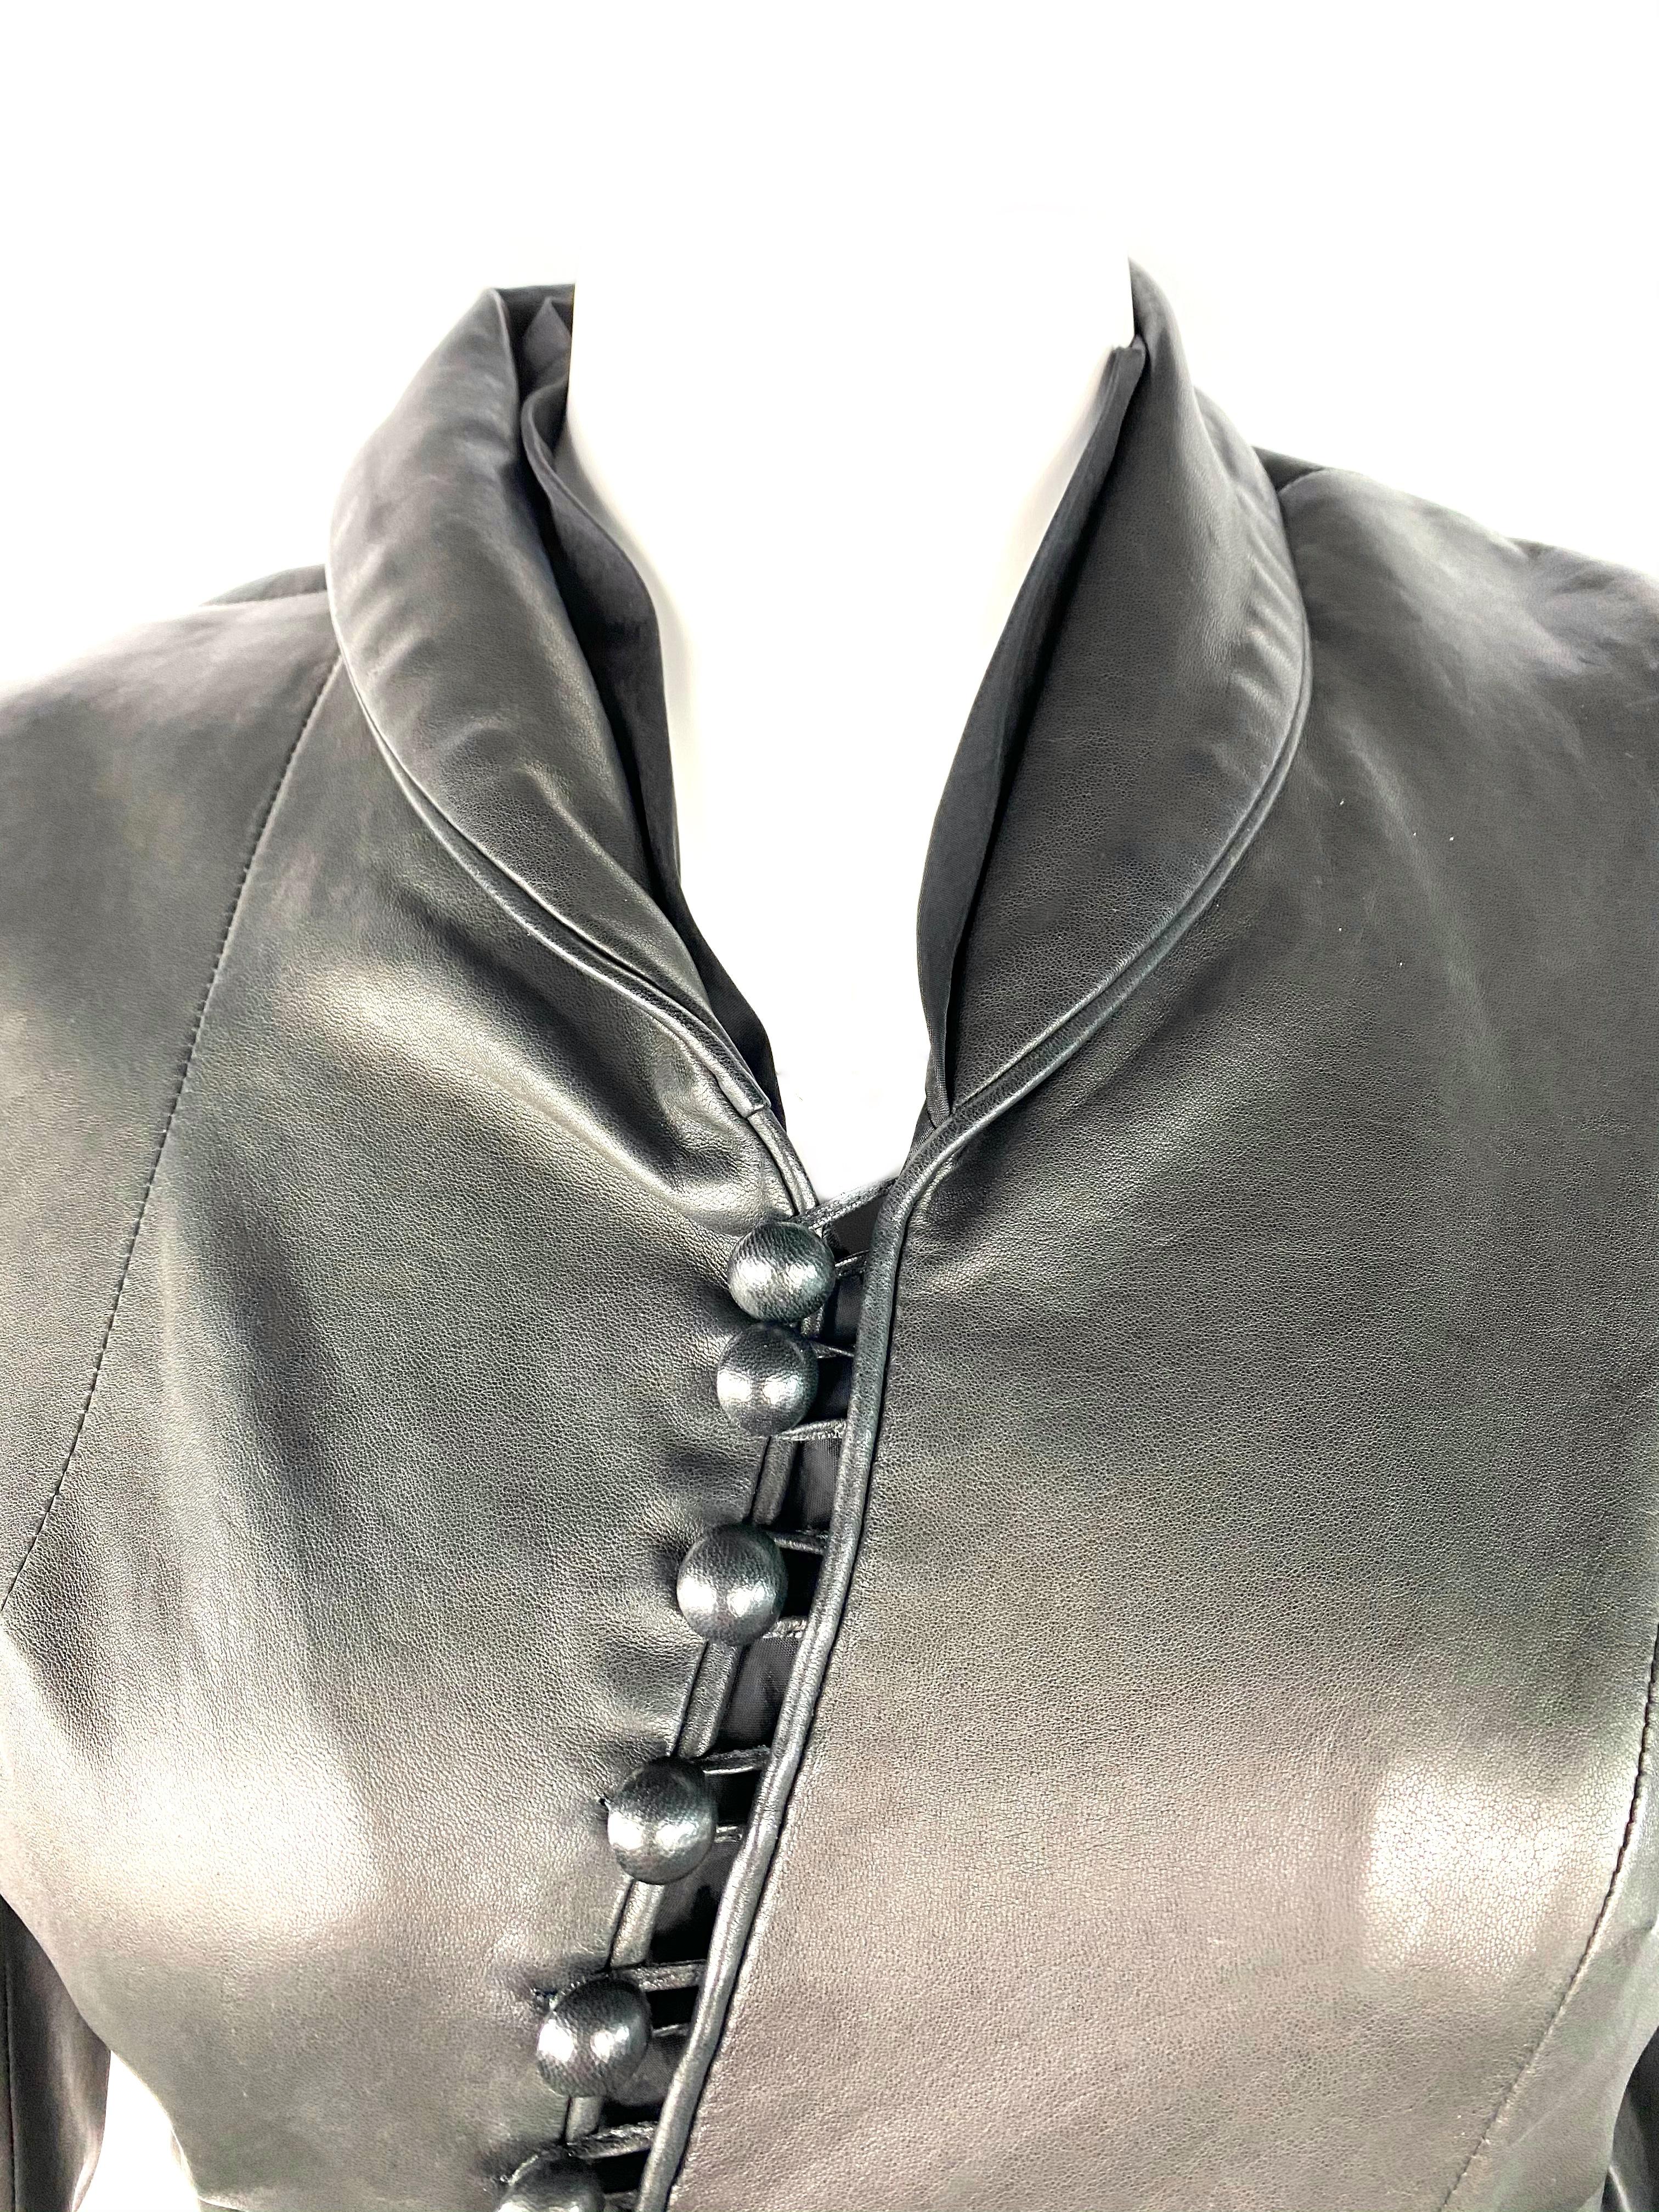 Product details:

100% lamb leather jacket designed by Nina Ricci, featuring collar, side pocket and front asymmetric button down closure.
Made in France.